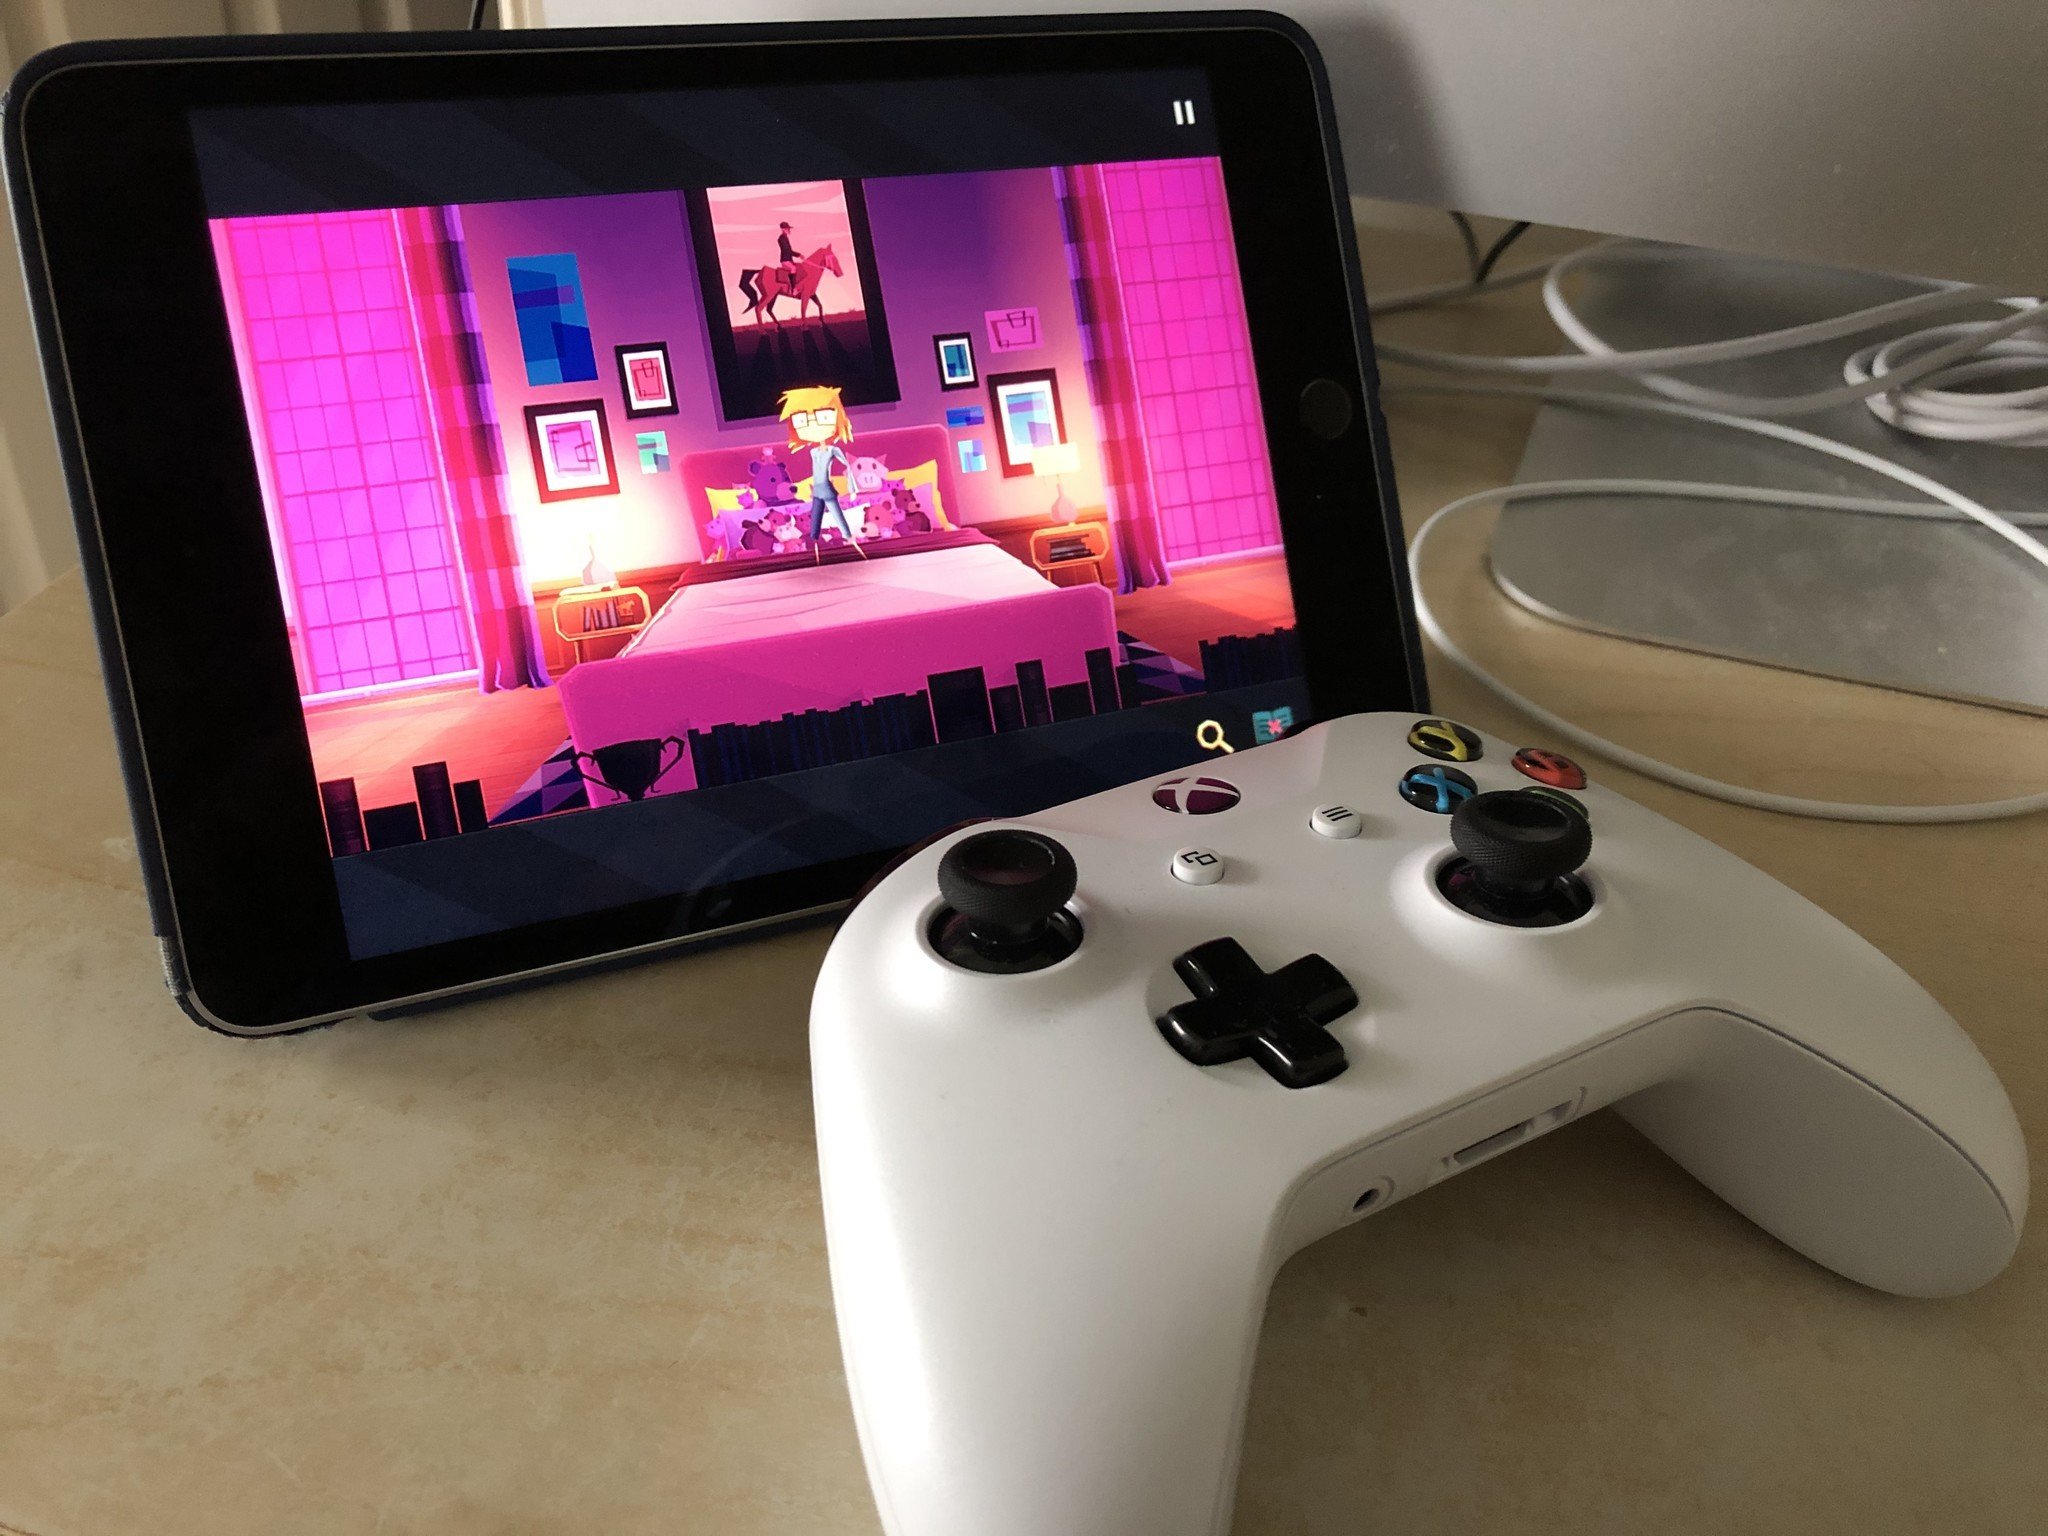 Updates to macOS Catalina and iOS 13 let you connect Bluetooth-capable Xbox One controllers to your Mac, iPad, iPhone, or Apple TV for use with Apple Arcade games.